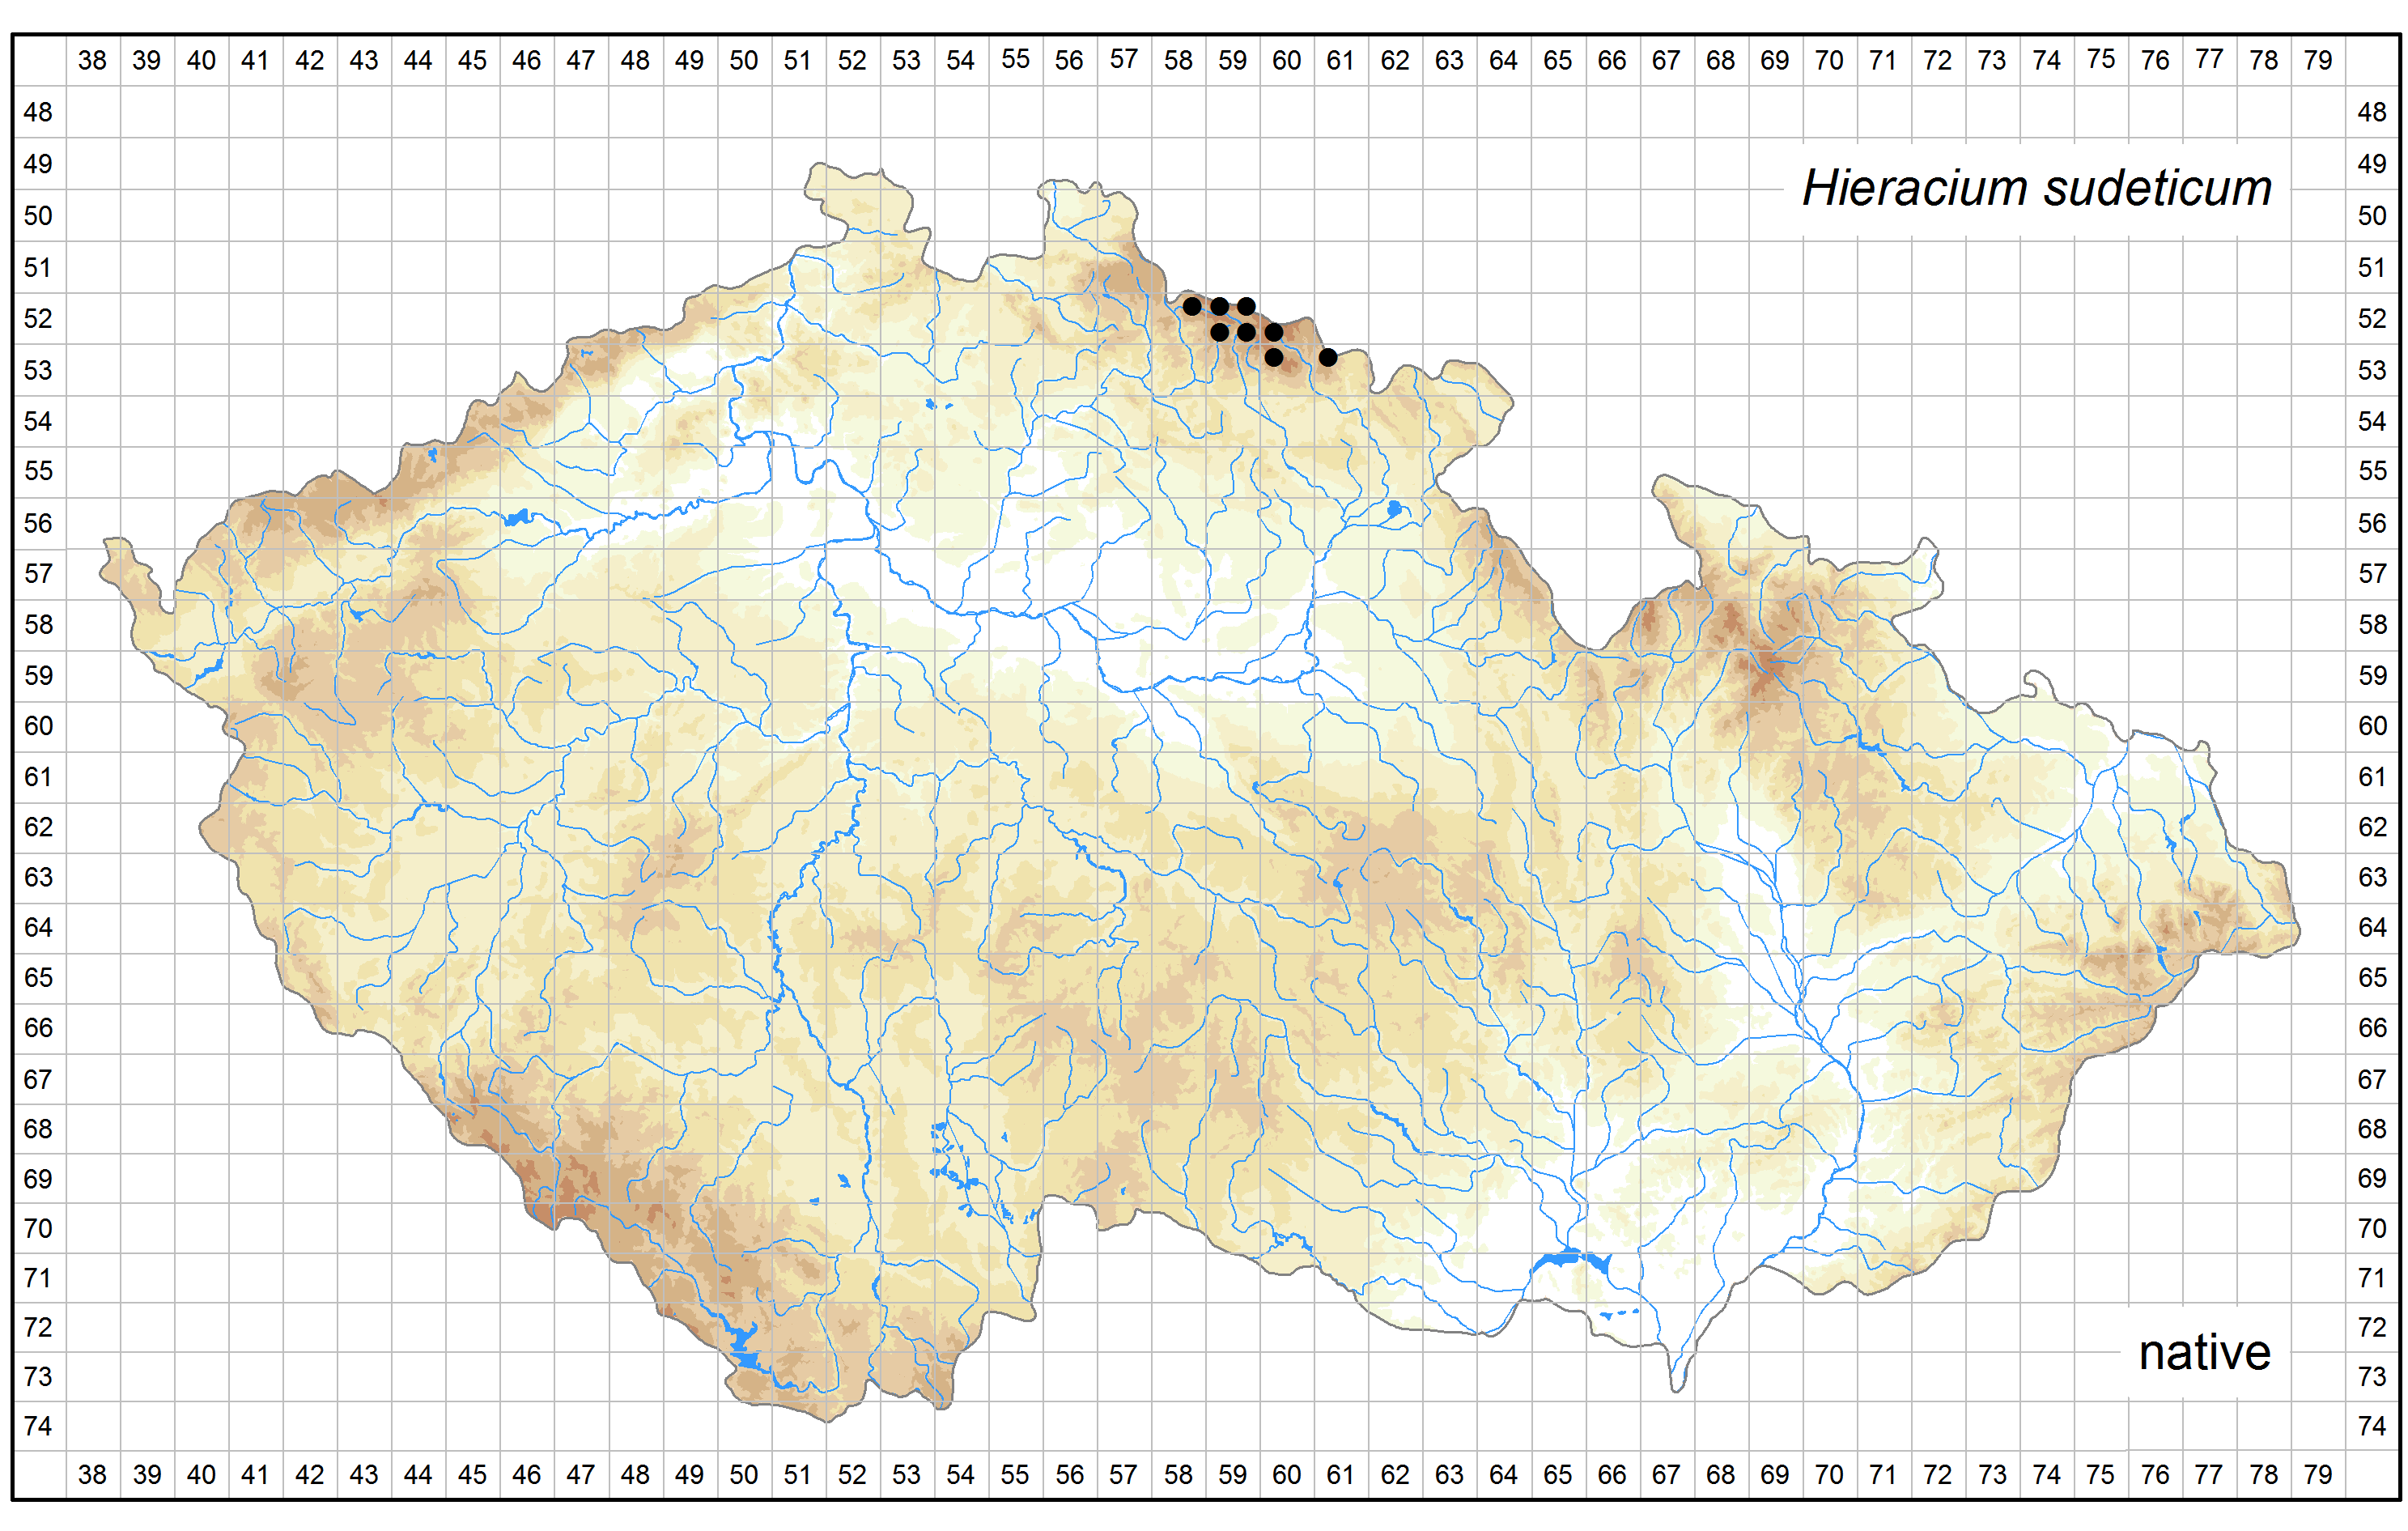 Distribution of Hieracium sudeticum in the Czech Republic Author of the map: Jindřich Chrtek Map produced on: 11-11-2016 Database records used for producing the distribution map of Hieracium